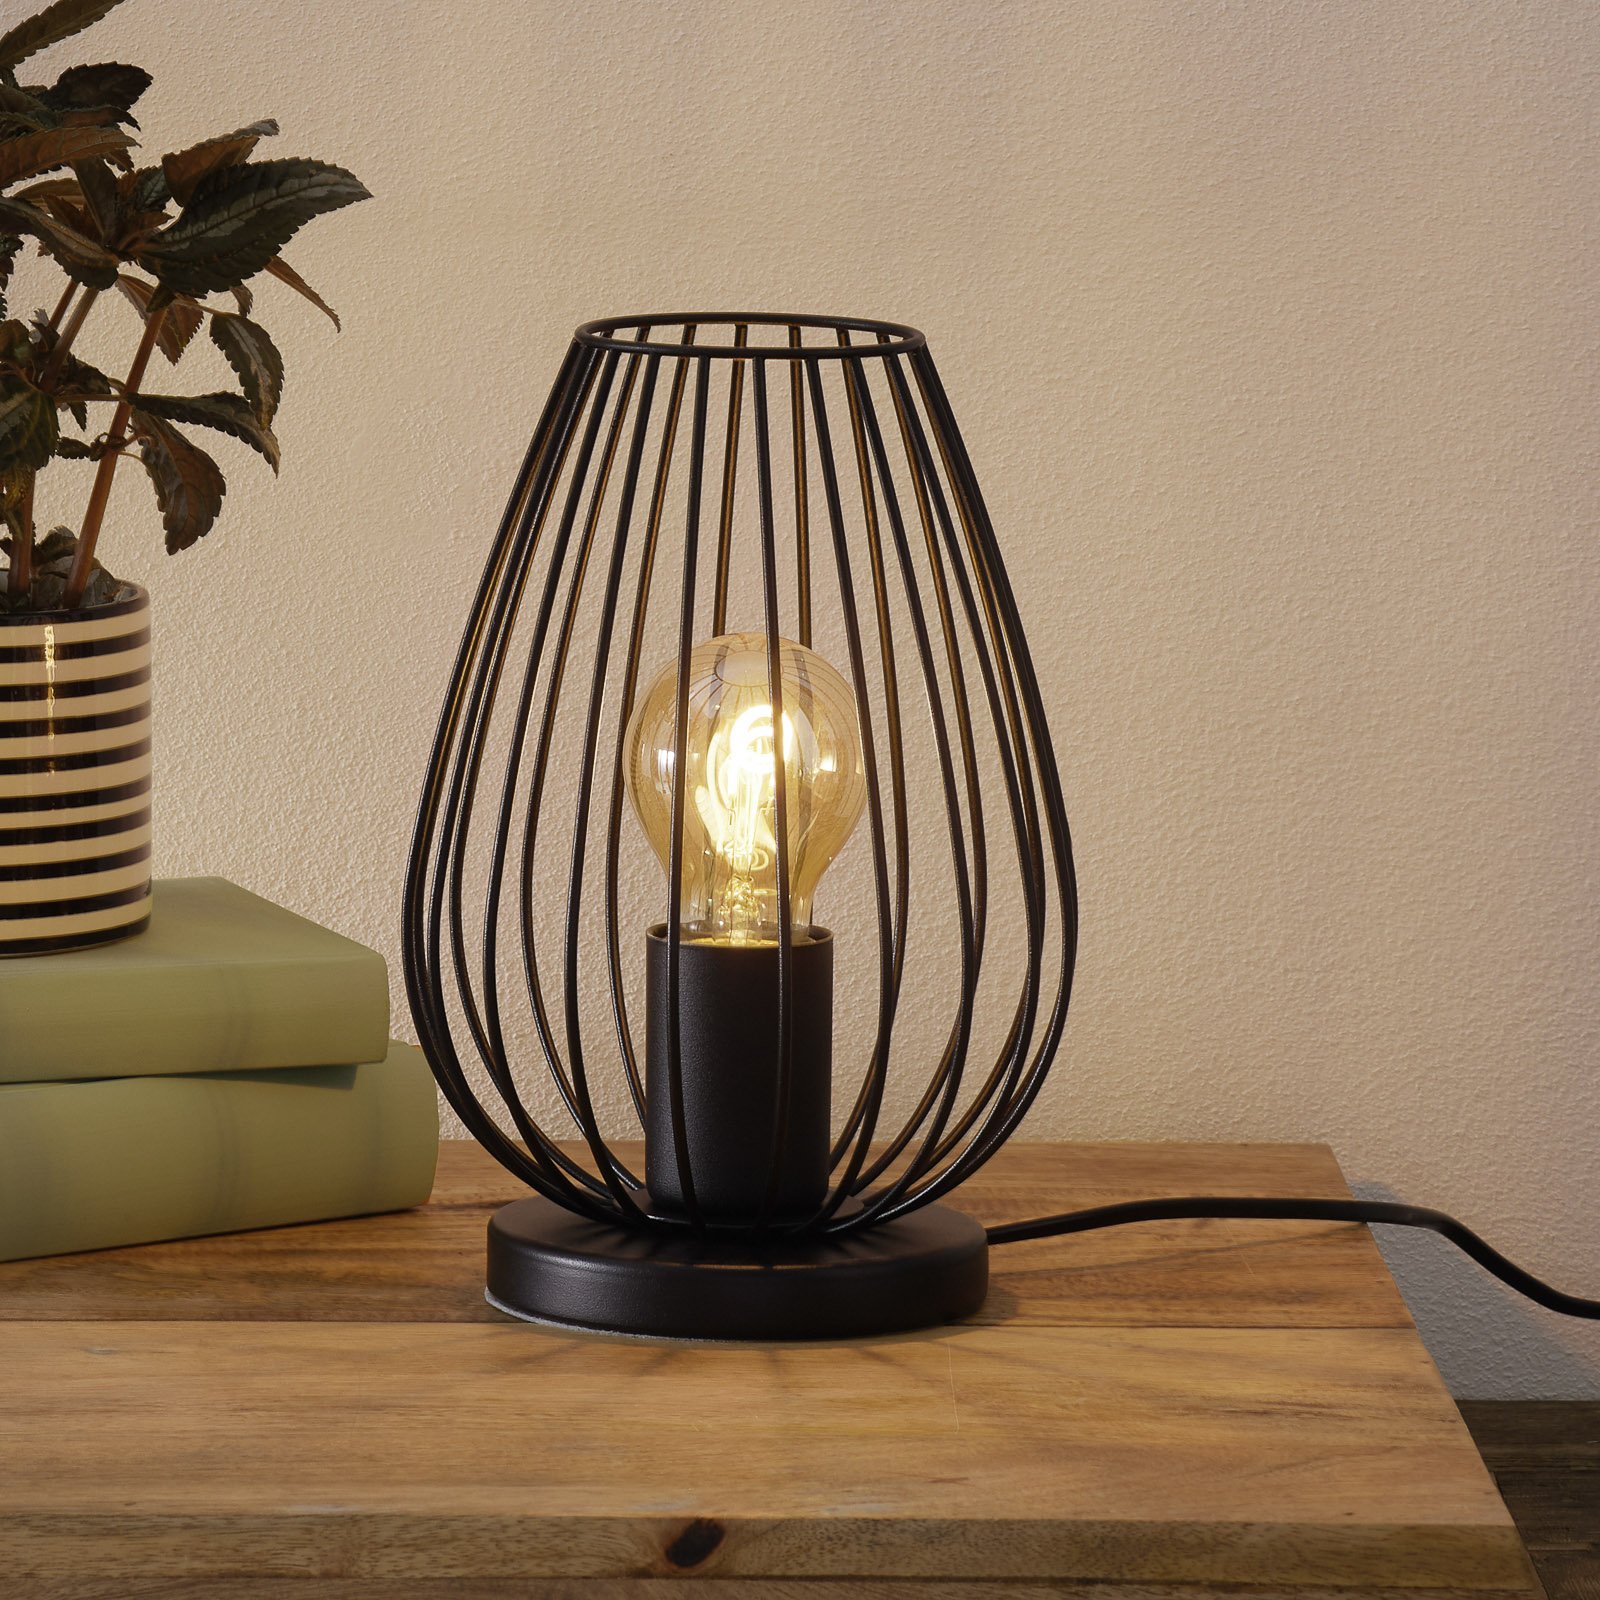 Newtown - a table lamp with a vintage look